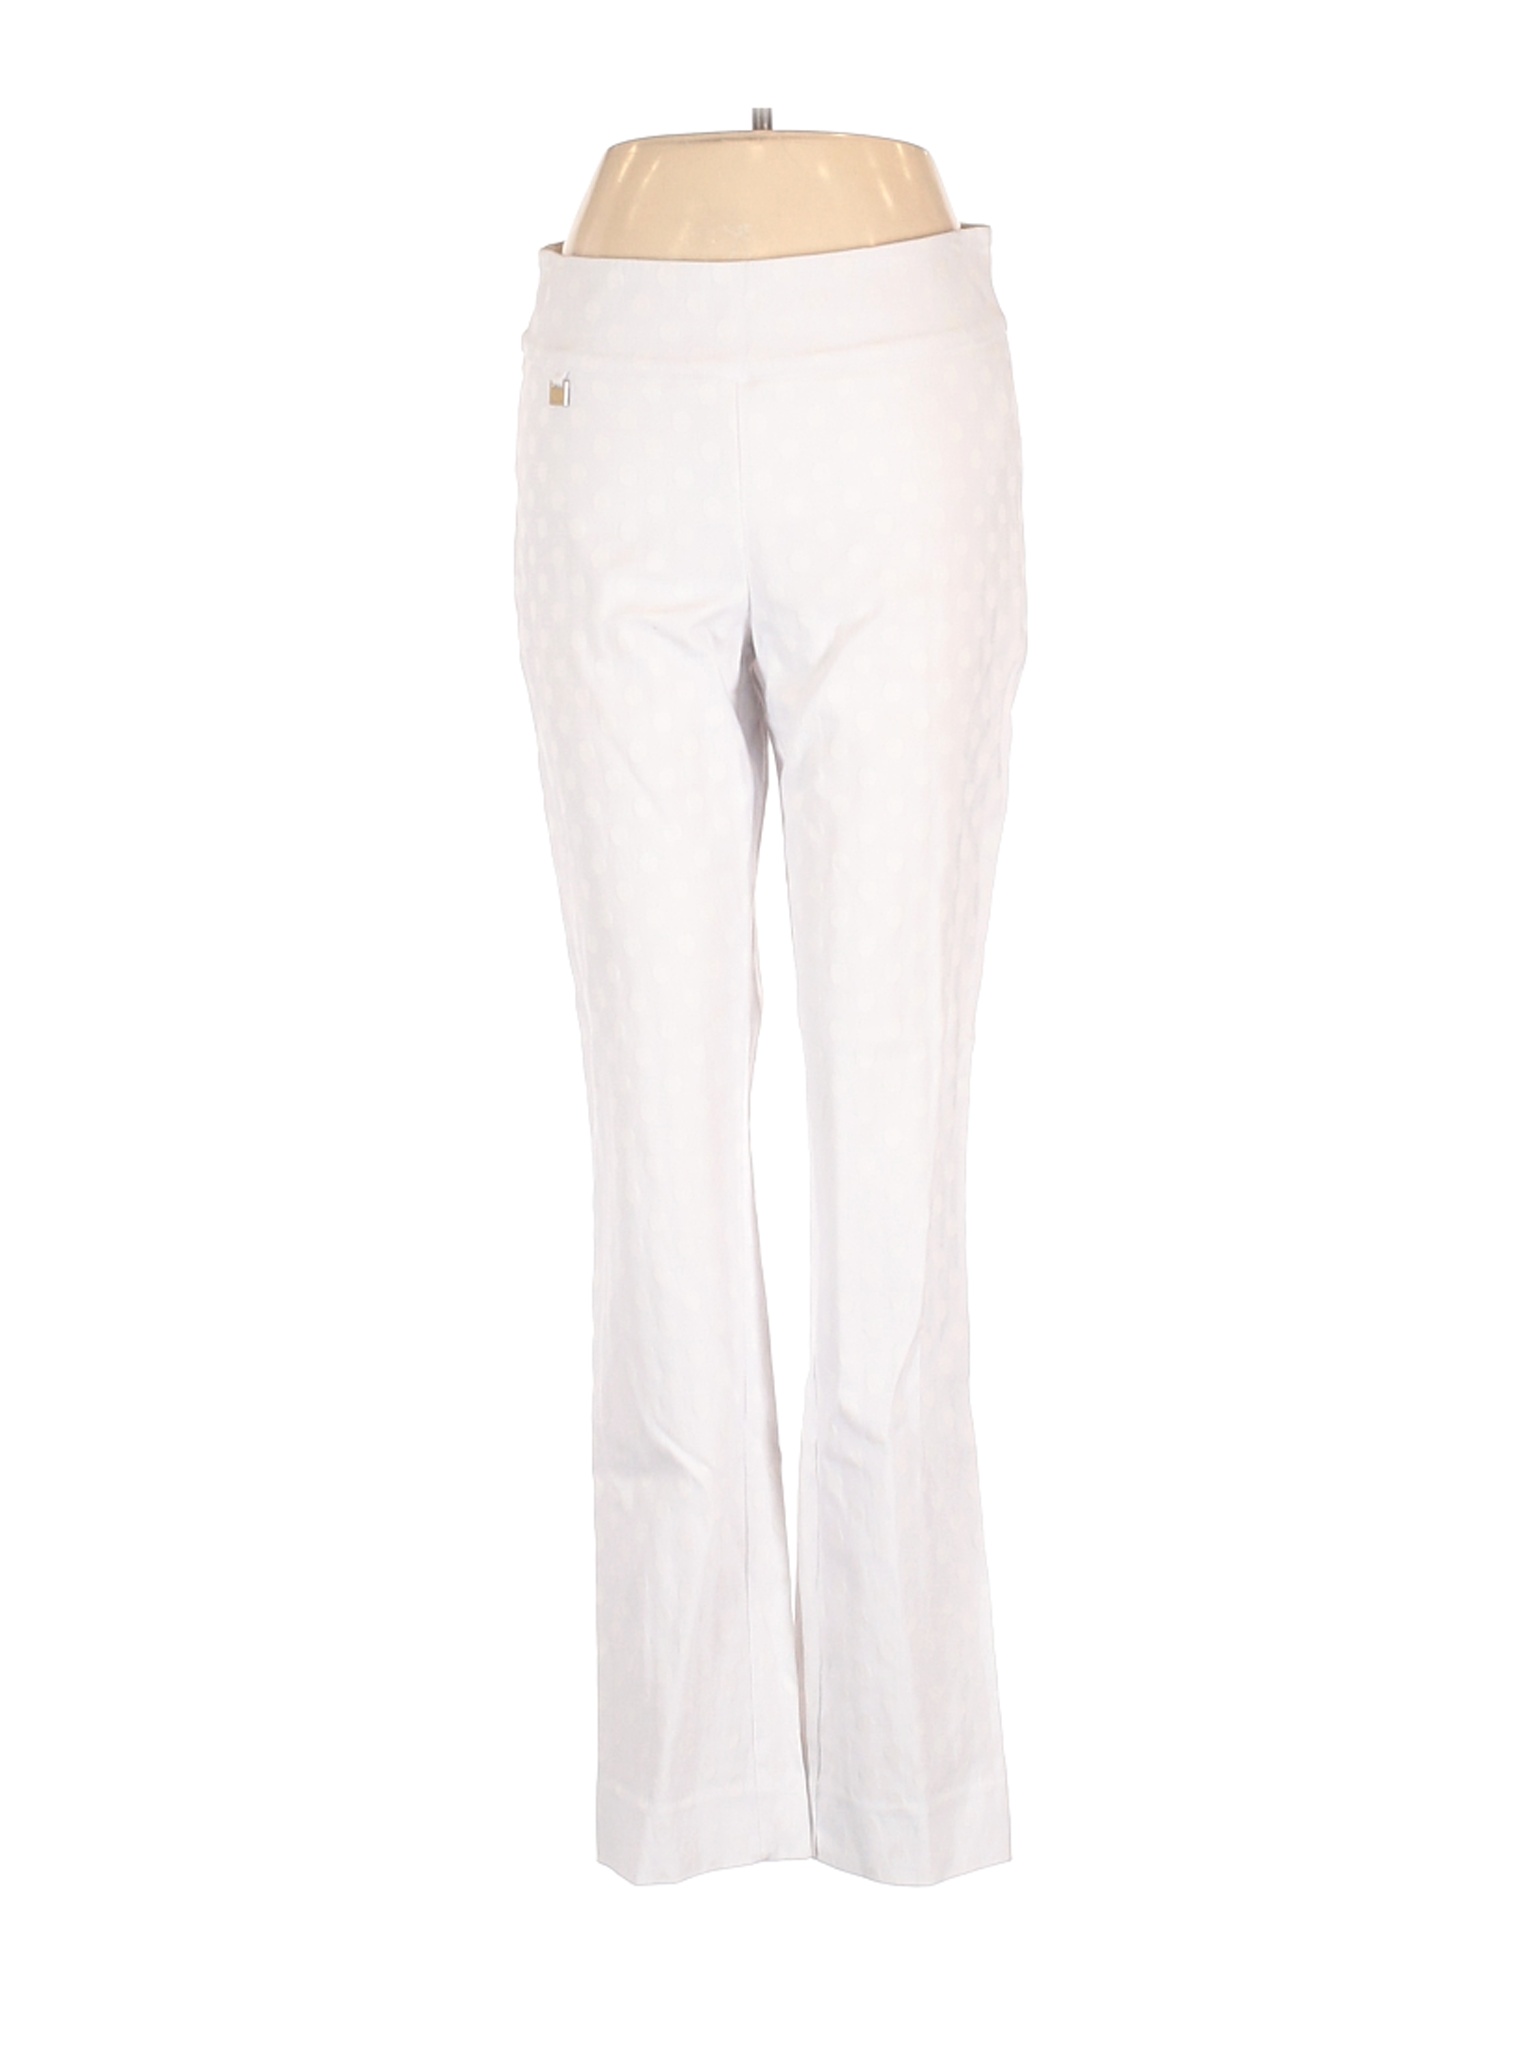 Peck & Peck Solid White Casual Pants Size 8 - 78% off | thredUP